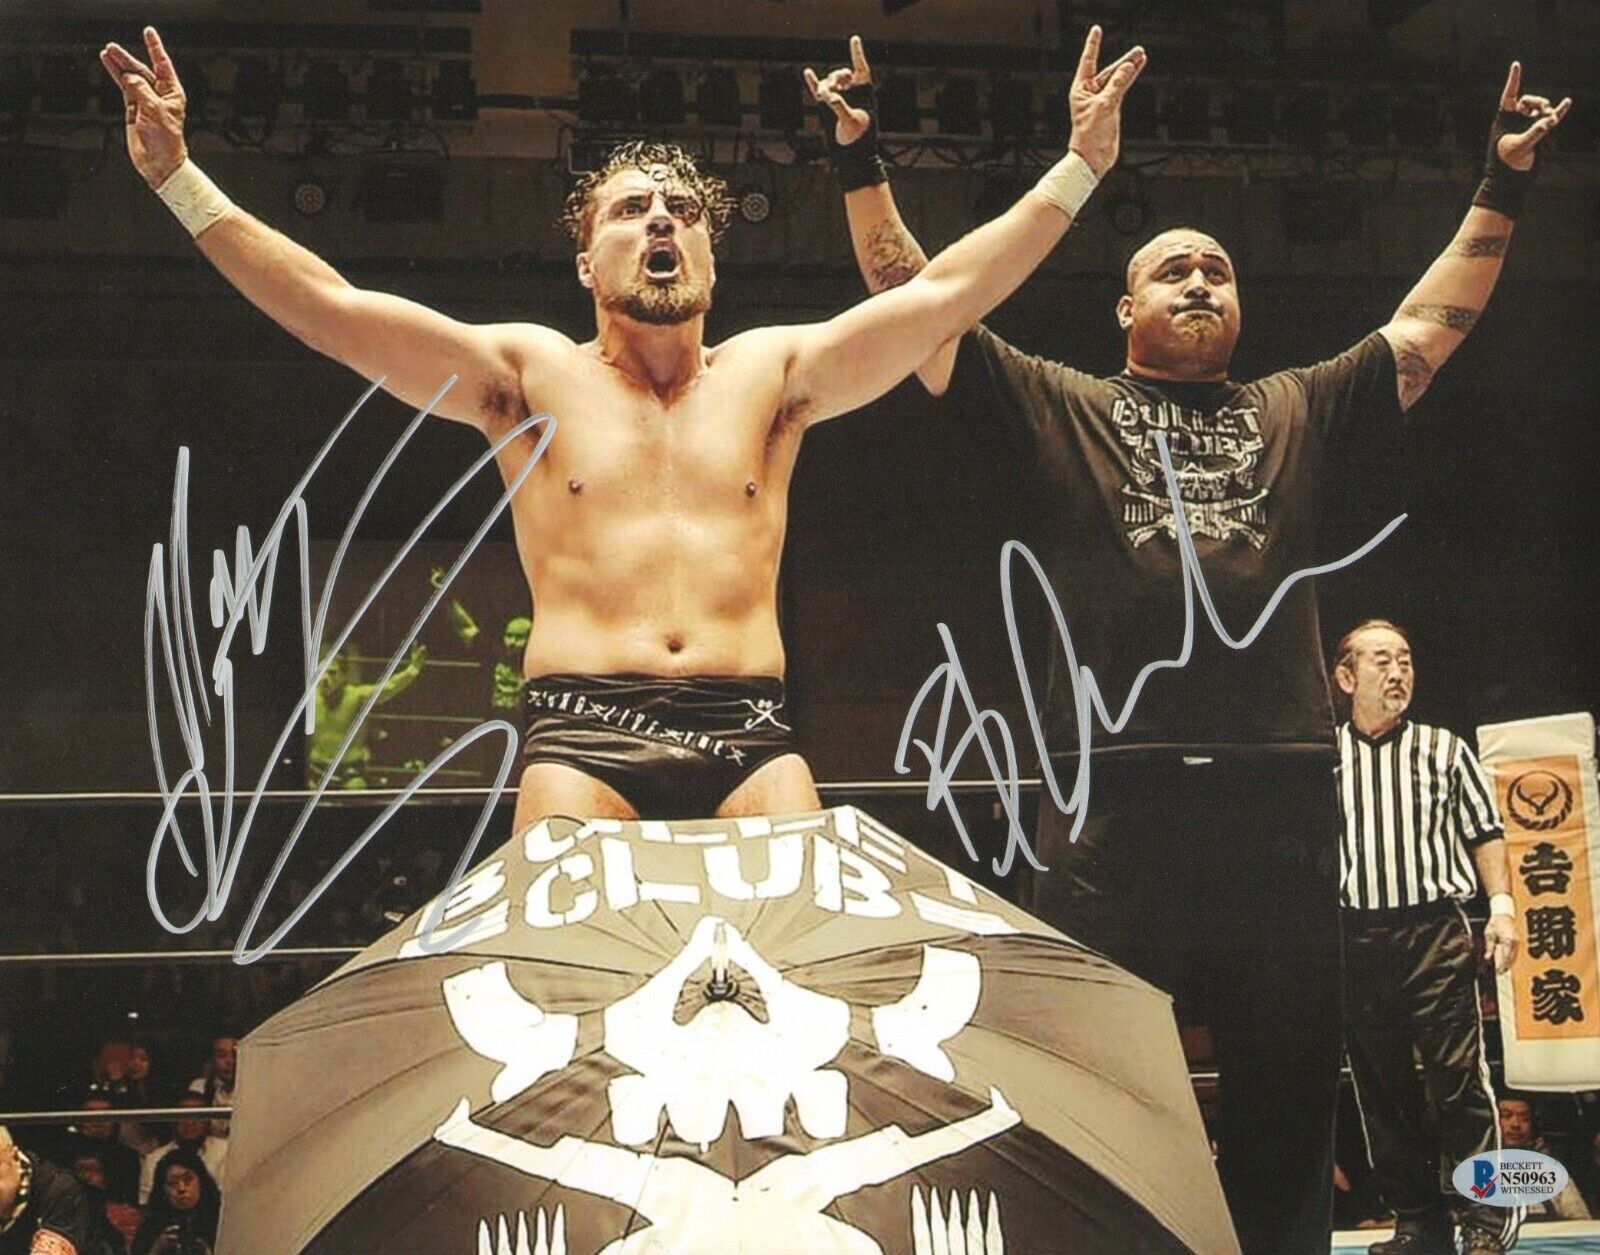 Marty Scurll & Bad Luck Fale Signed 11x14 Photo Poster painting BAS COA New Japan Pro Wrestling